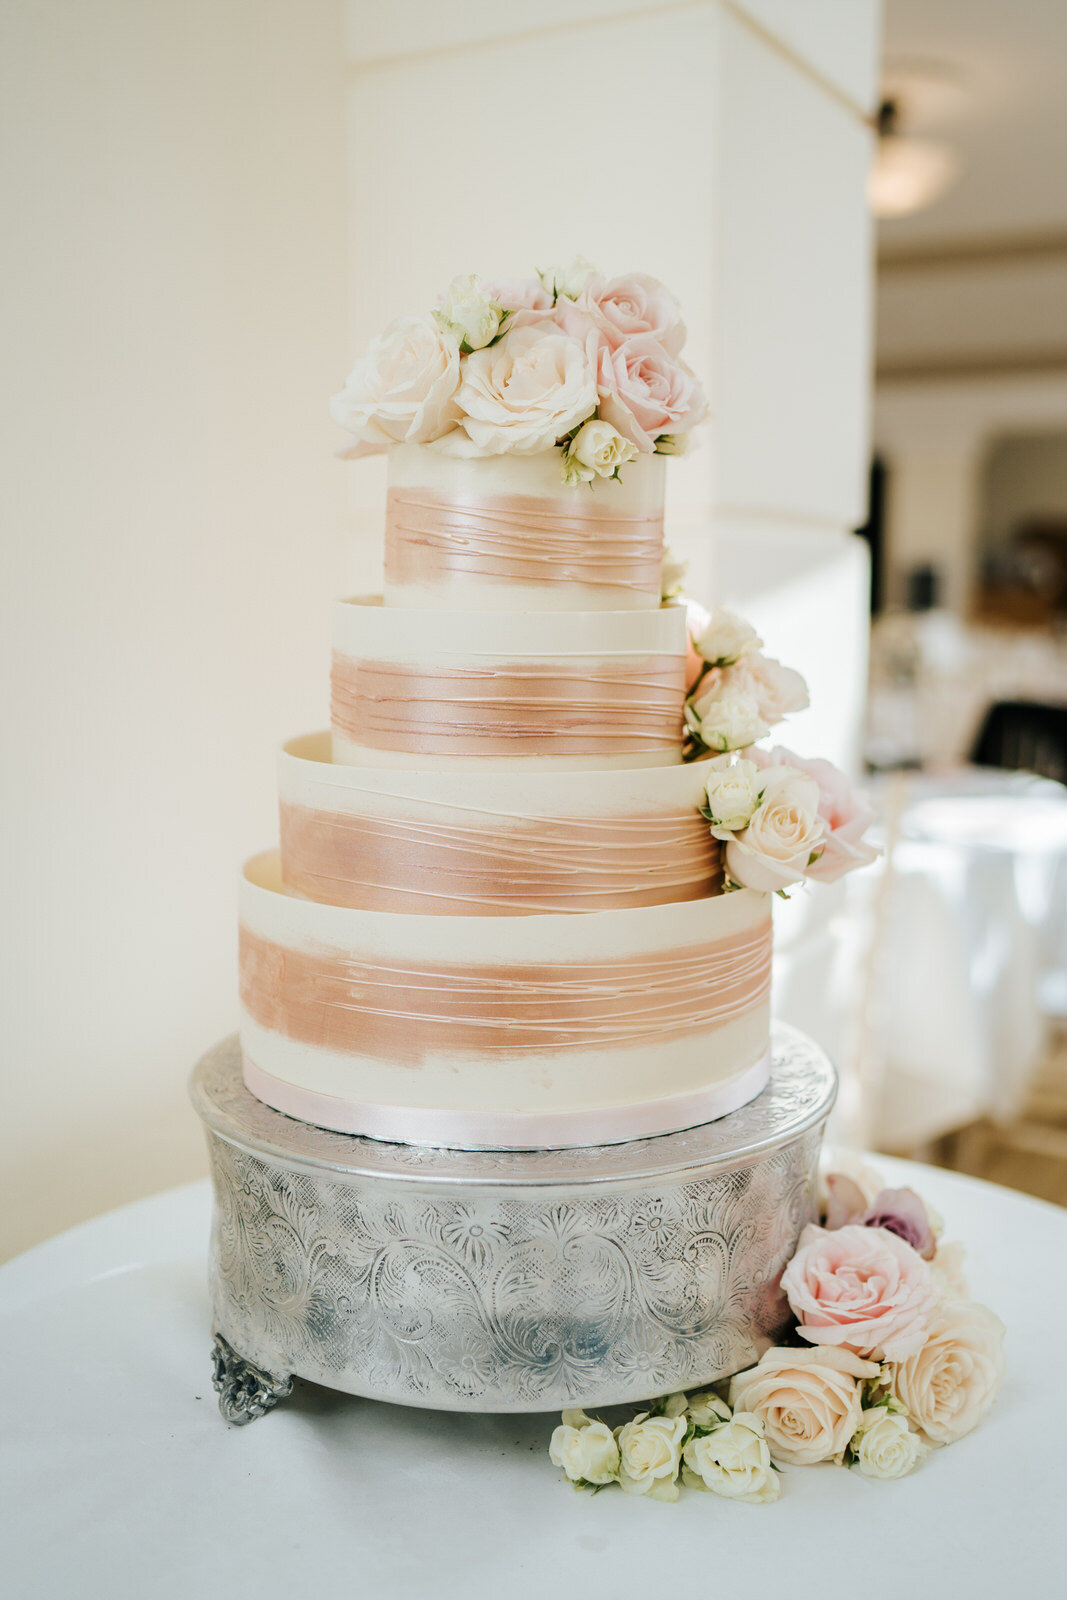 Photograph of the bride and groom's wedding cake at Pembroke Lodge in Richmond